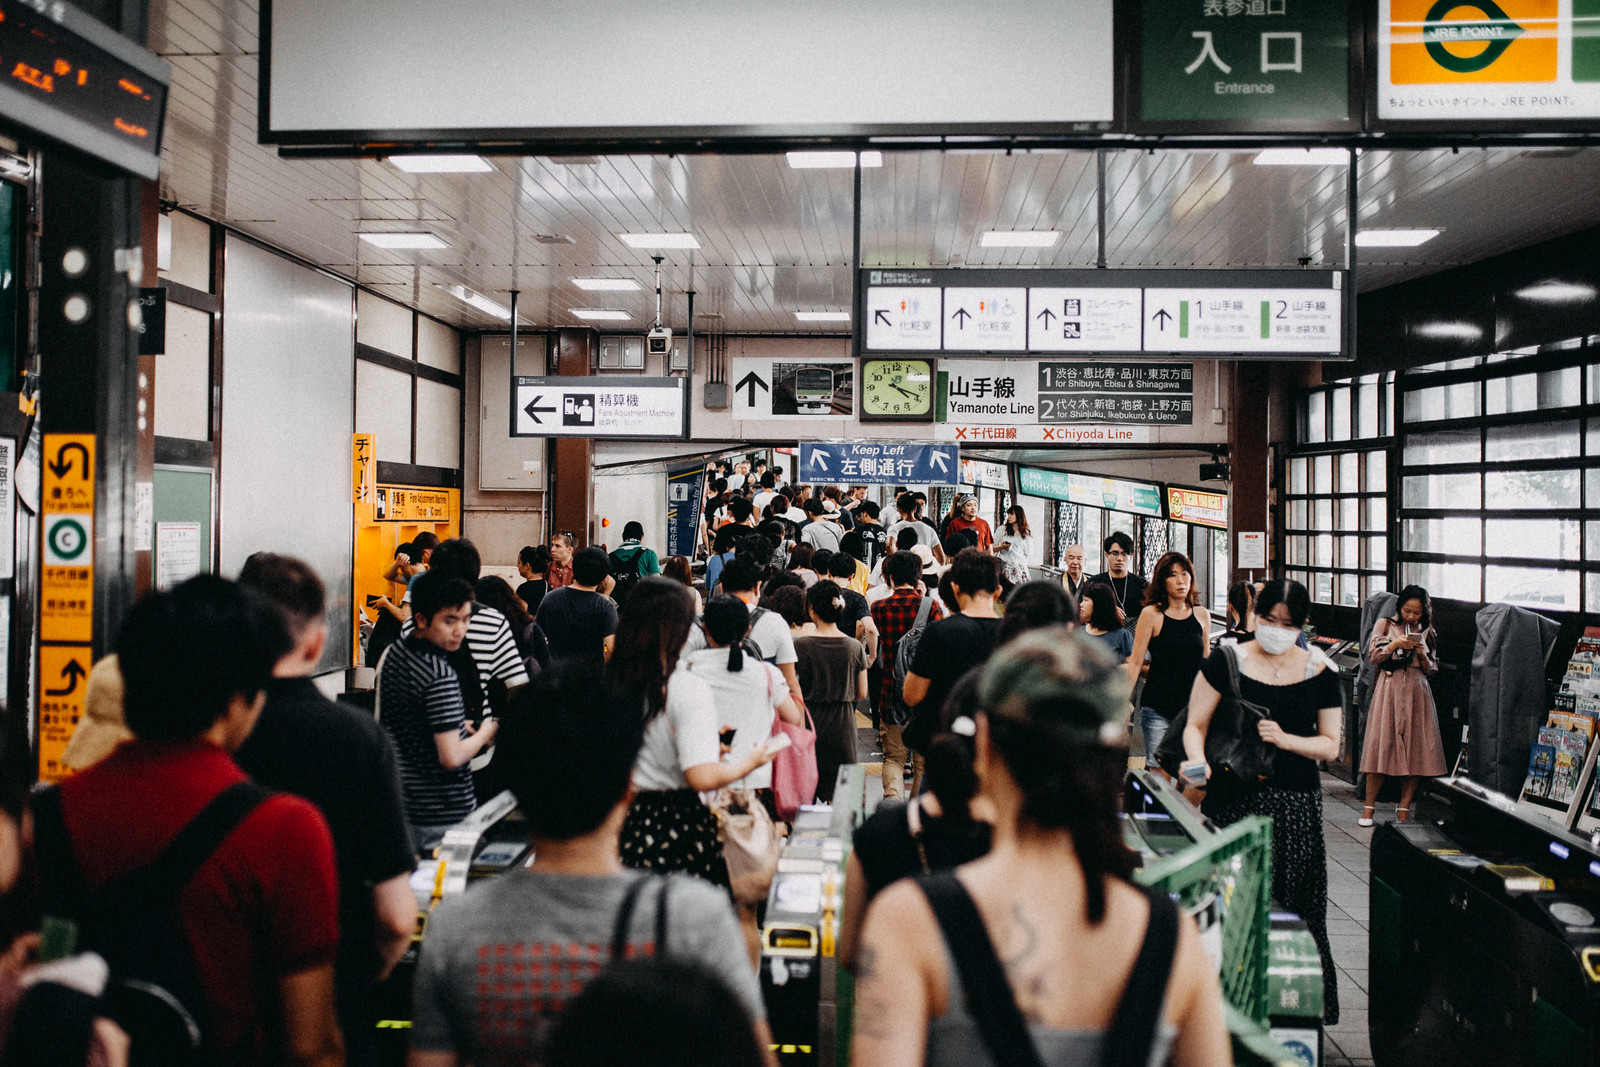 Inside a crowded subway station near Harajuku and Yoyogi Park in Tokyo Japan full of people